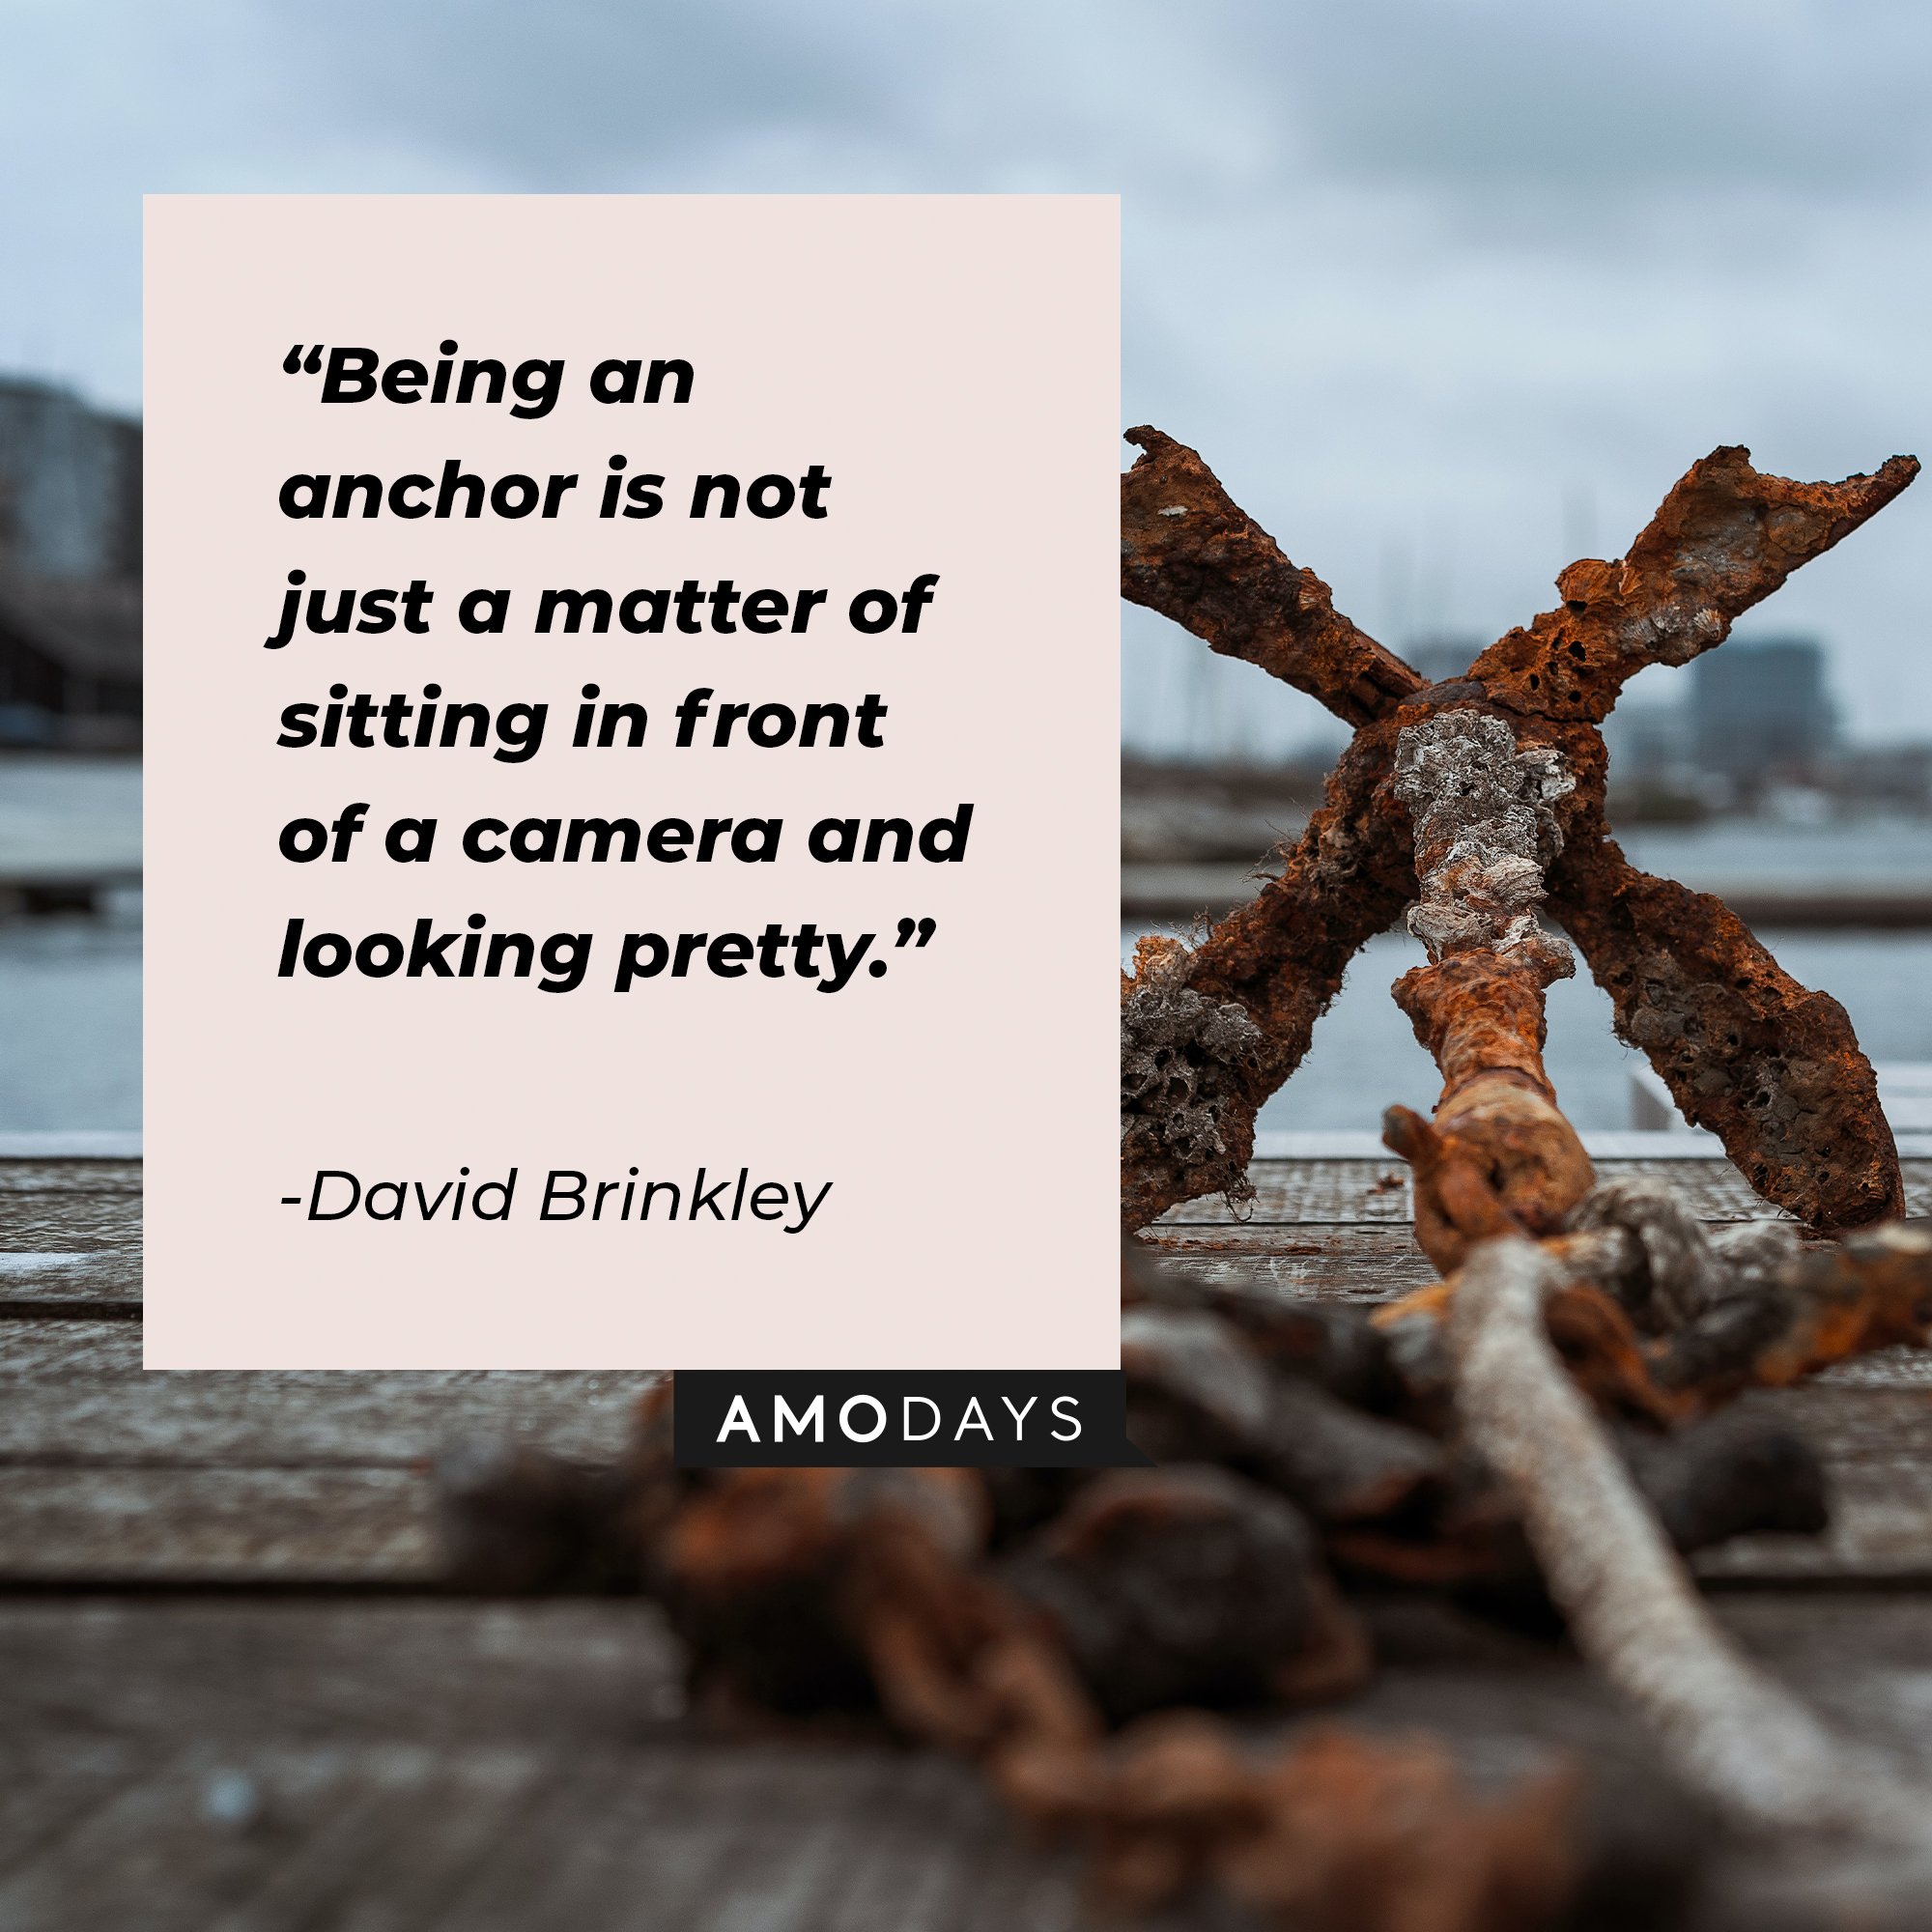 David Brinkley's quote: "Being an anchor is not just a matter of sitting in front of a camera and looking pretty." | Image: AmoDays